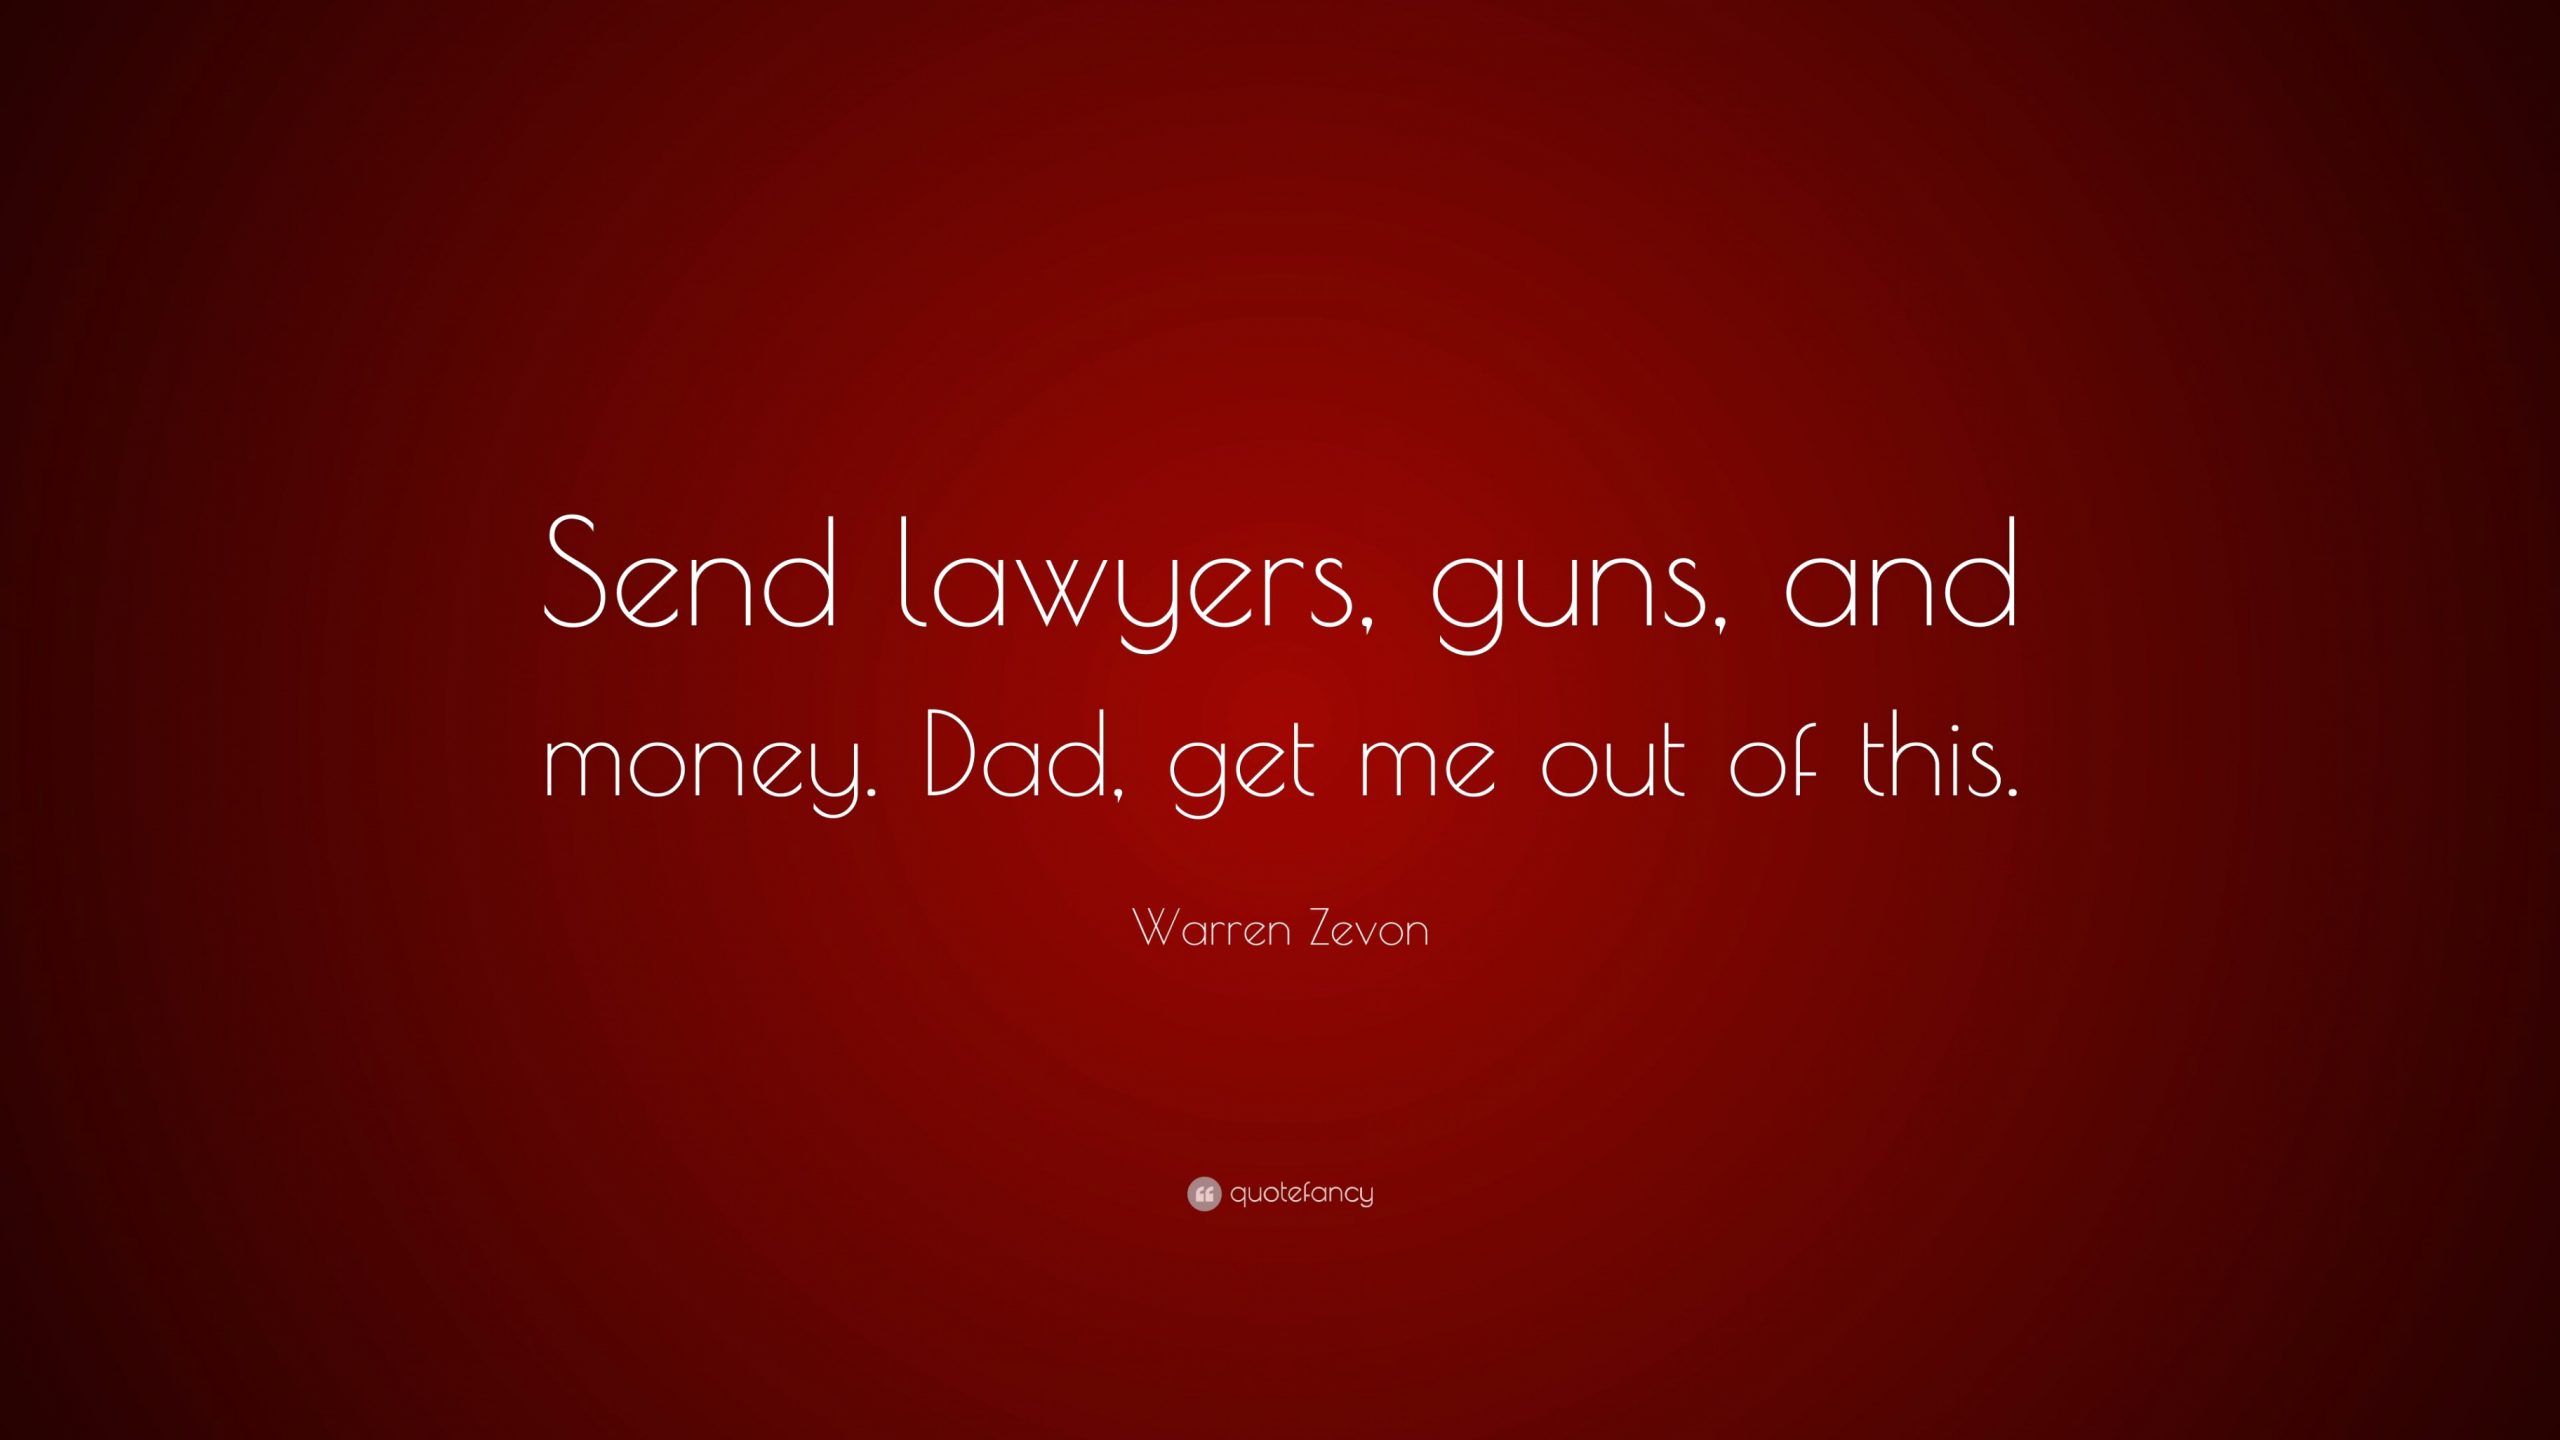 Warren Zevon Send lawyers guns and money Dad me out of this